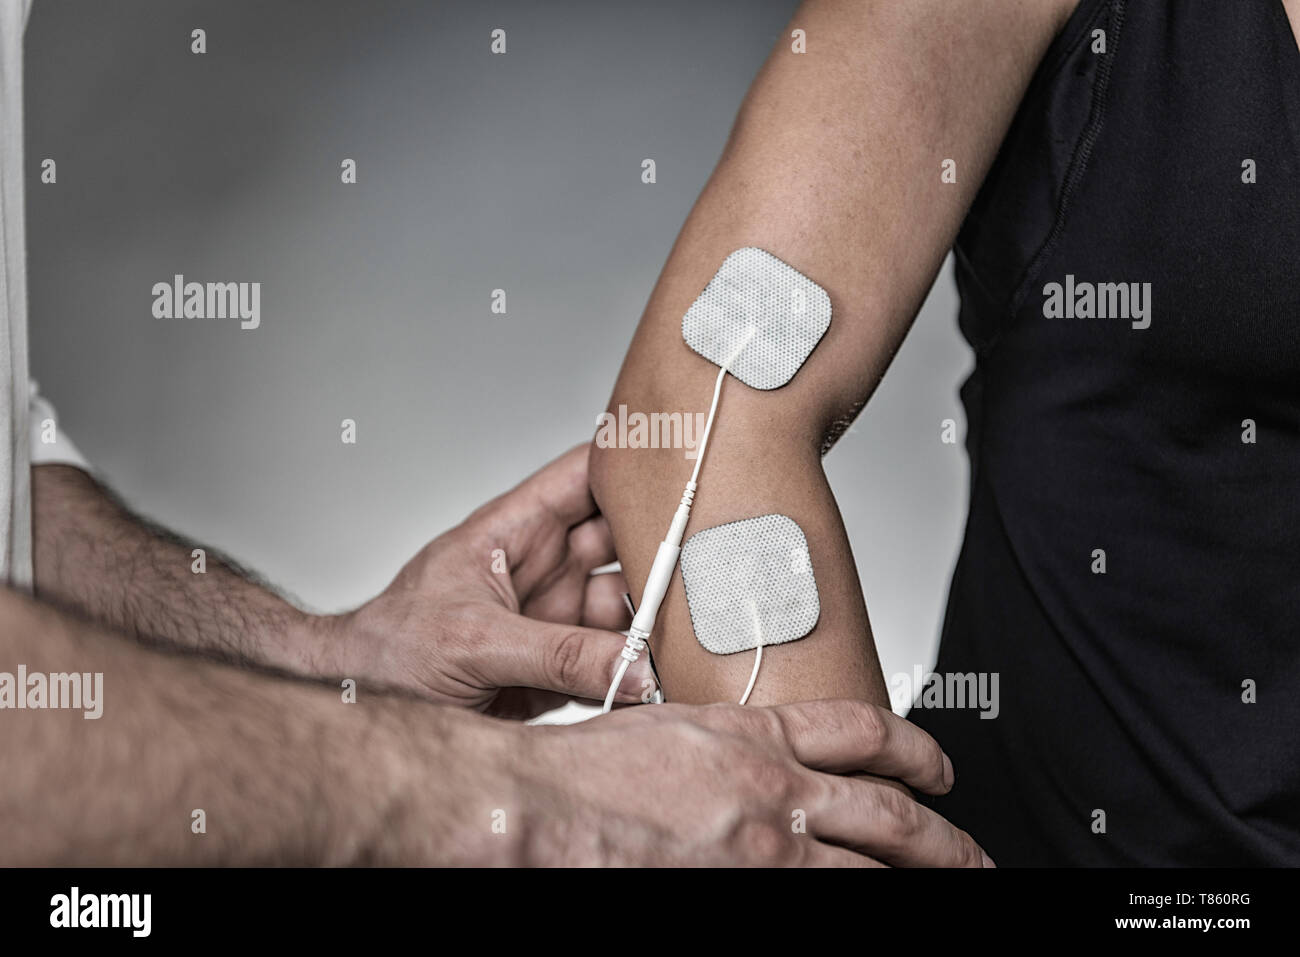 Placing TENS electrodes on arm Stock Photo